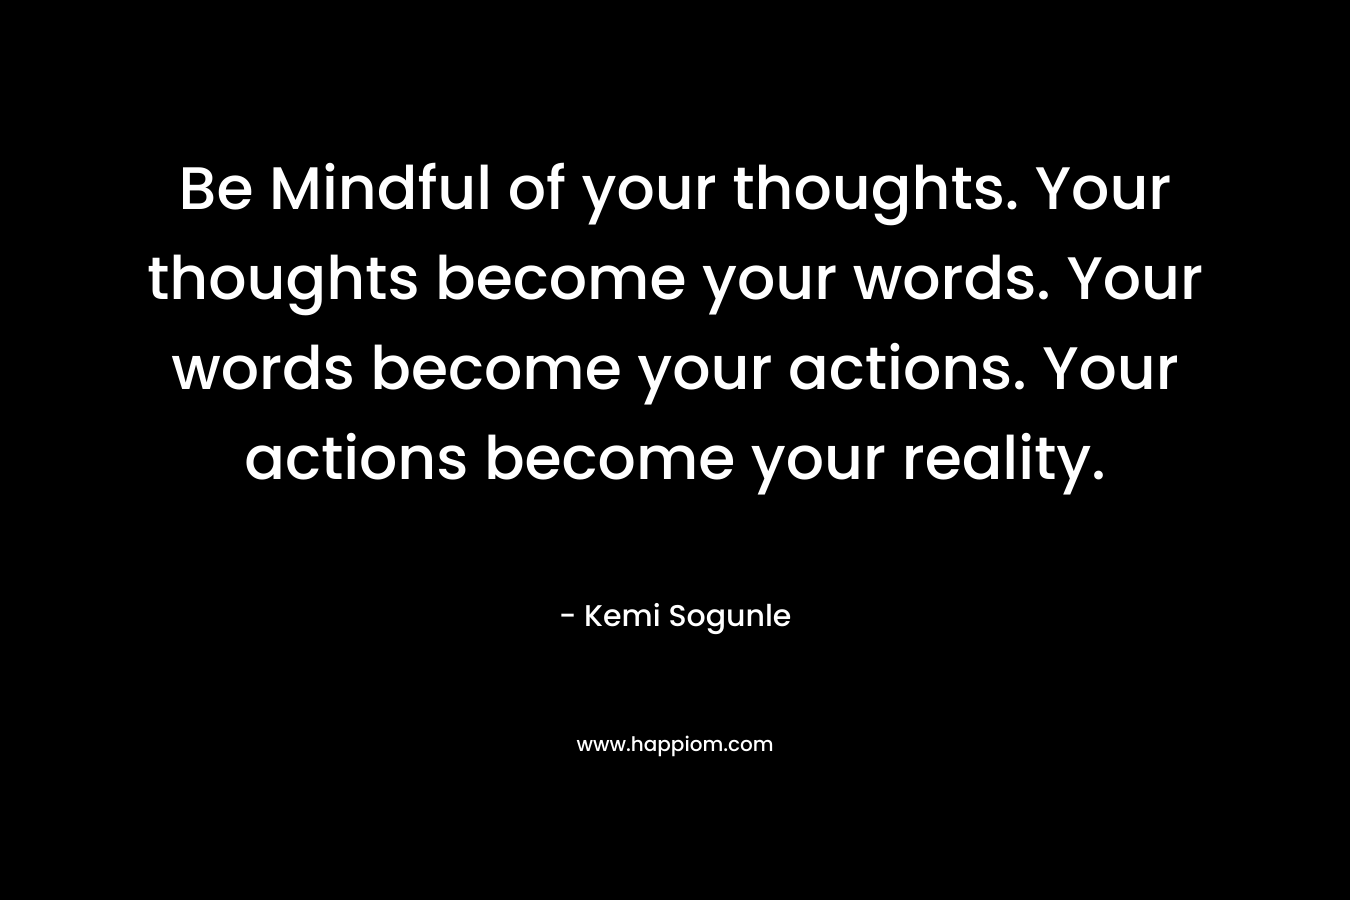 Be Mindful of your thoughts. Your thoughts become your words. Your words become your actions. Your actions become your reality.